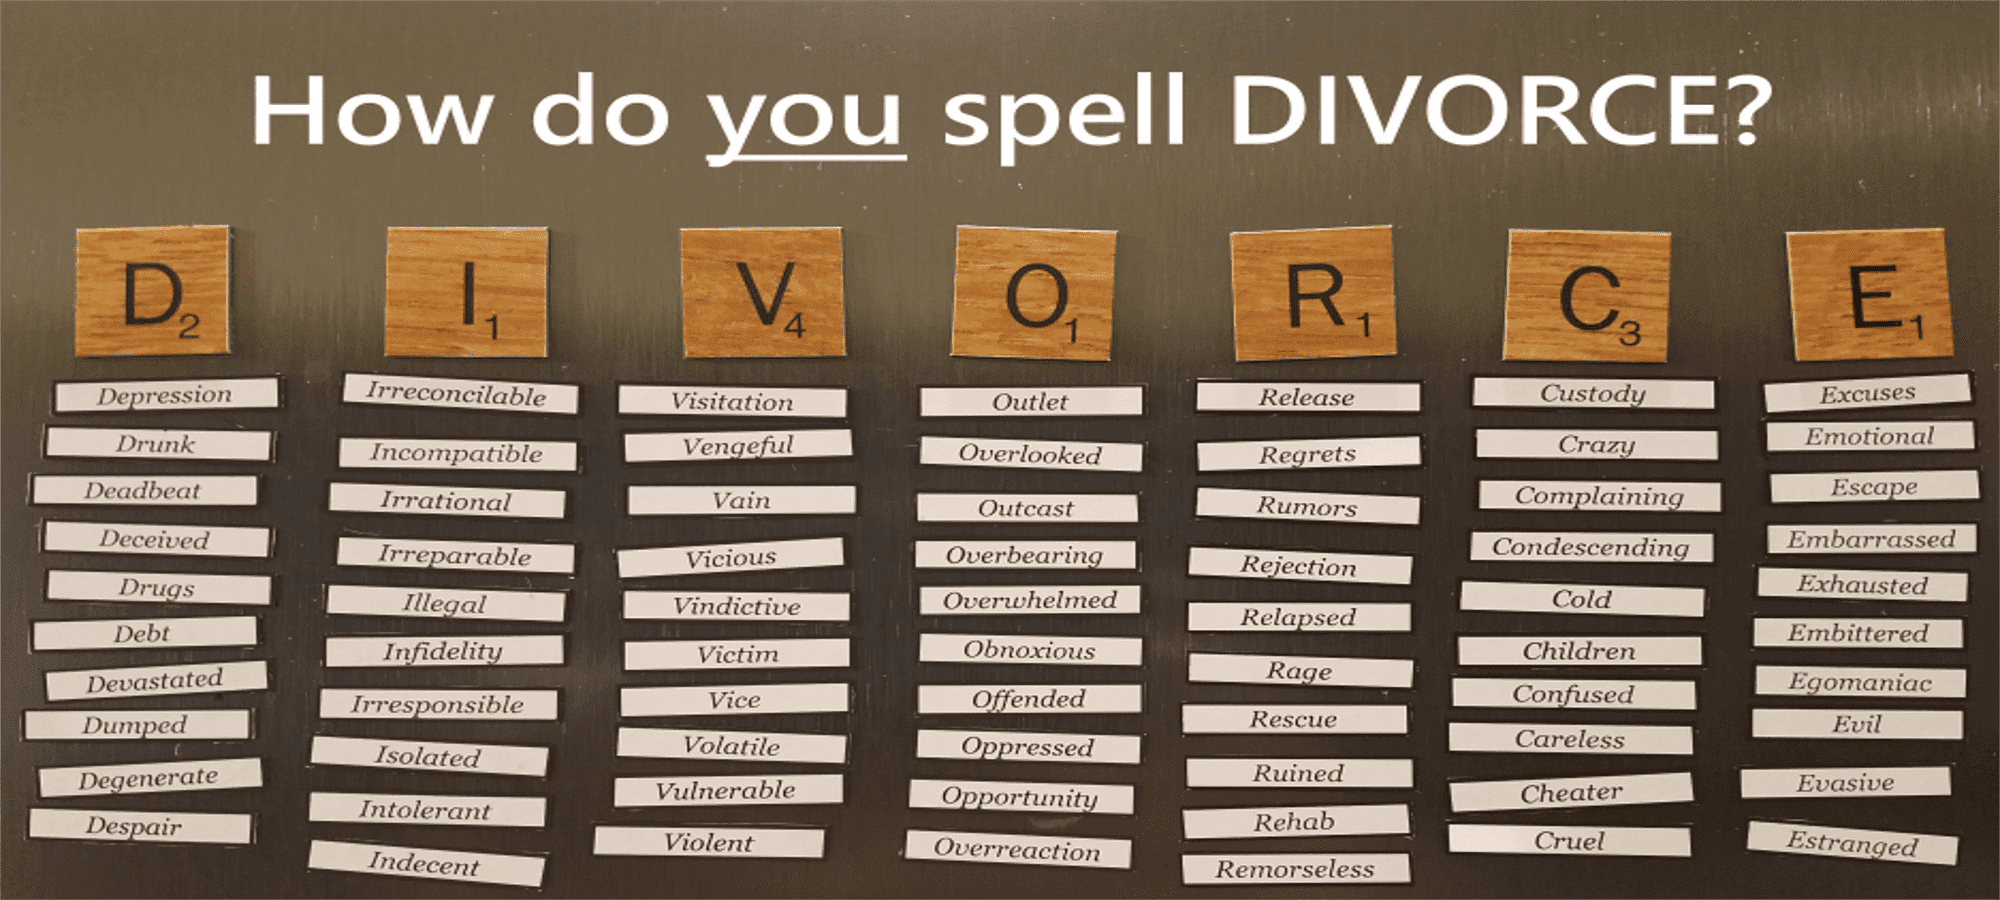 How do you spell DIVORCE? infographic